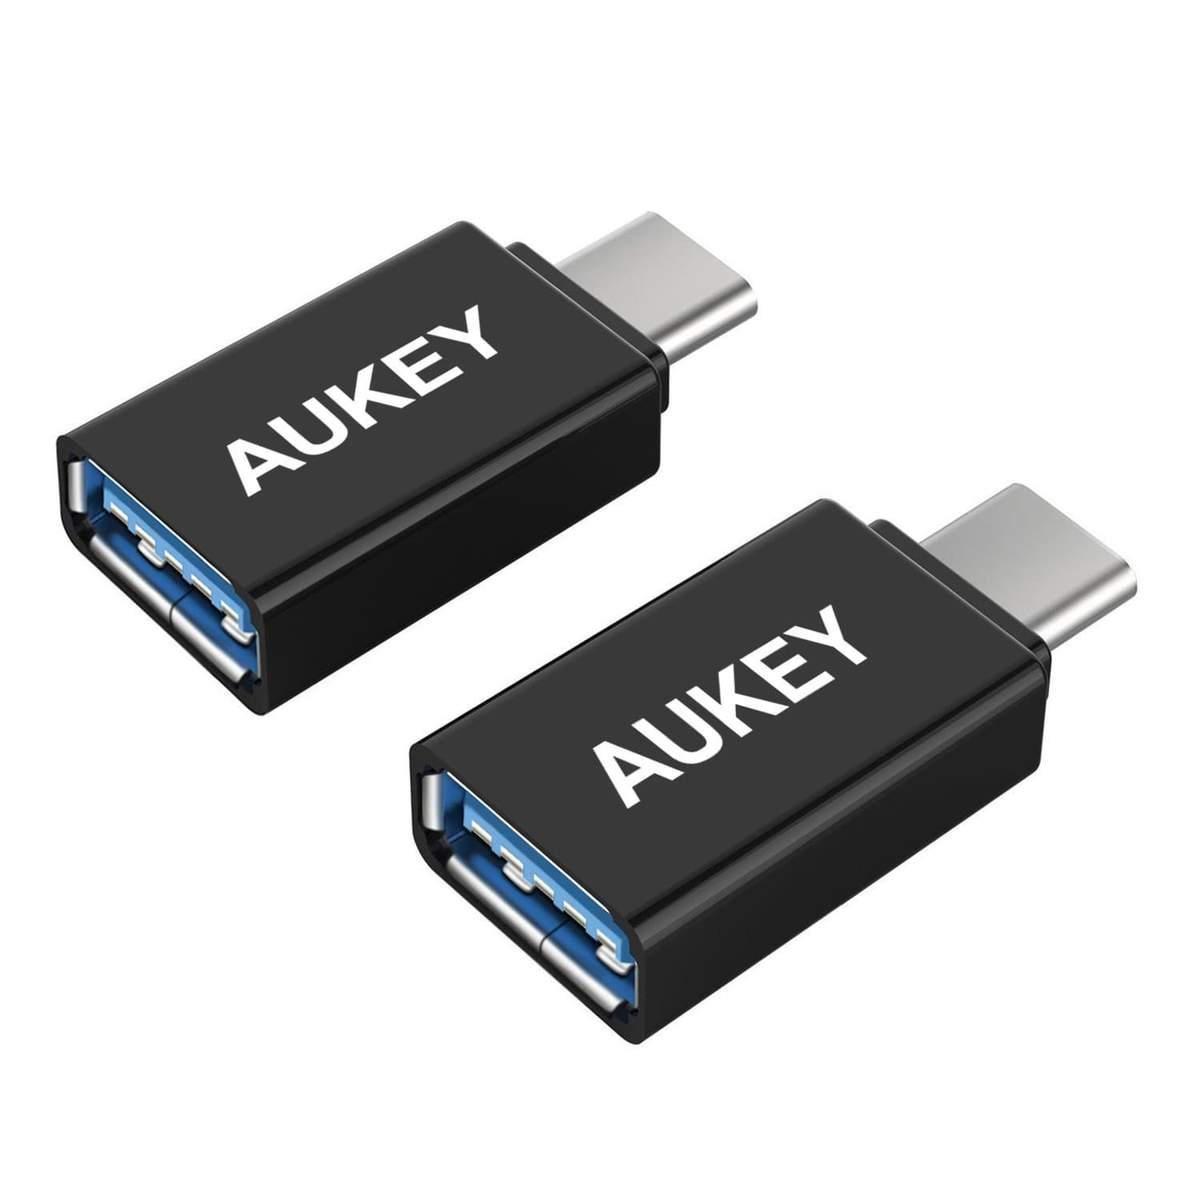 USB 3.0 A to C Adapter Pack)